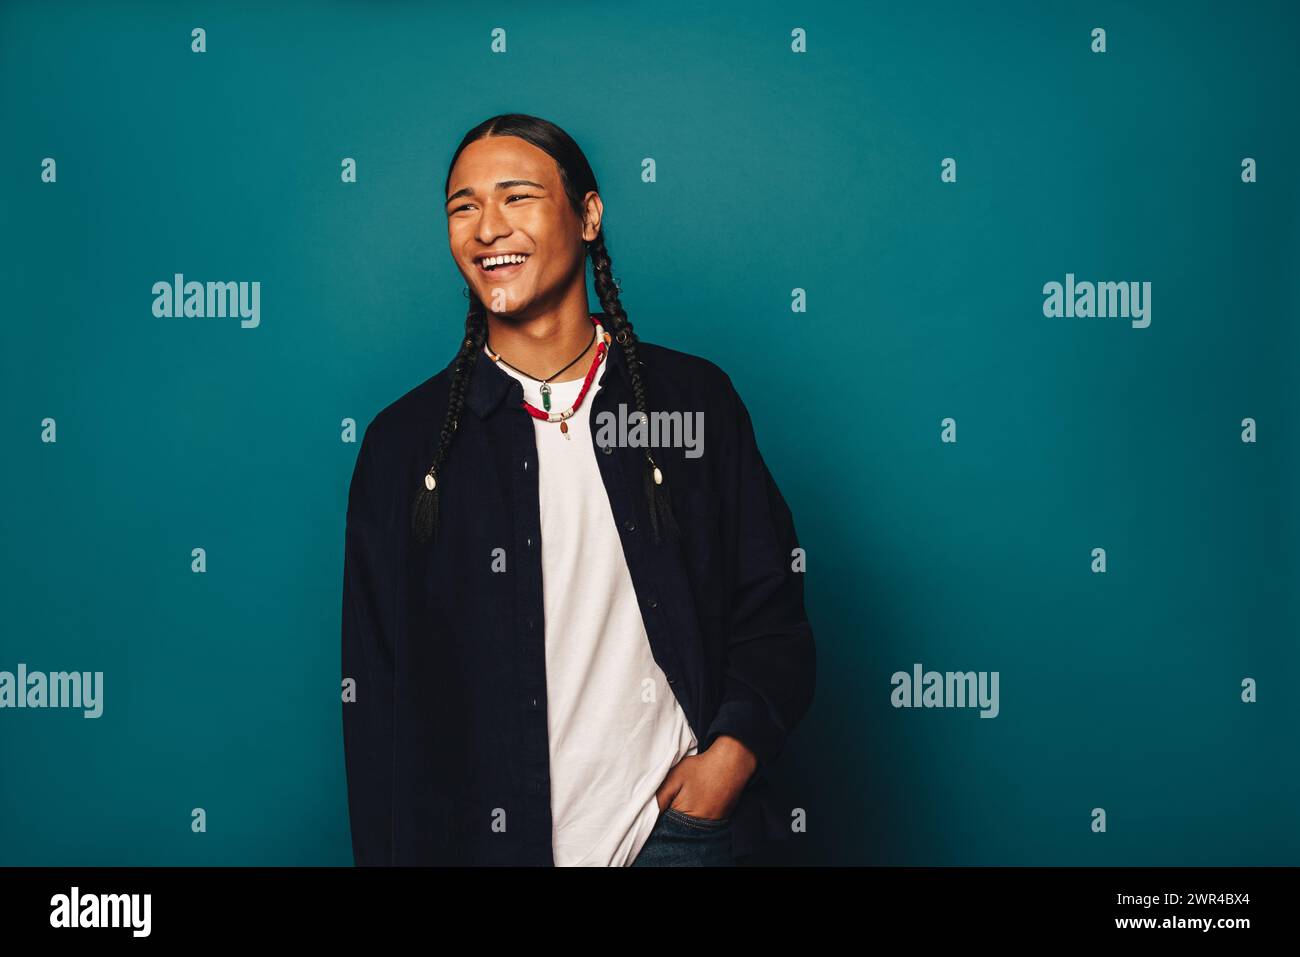 Happy young man with braided hair stands confidently against a blue background. His casual clothing and ethnic accessories add to his fashionable appe Stock Photo